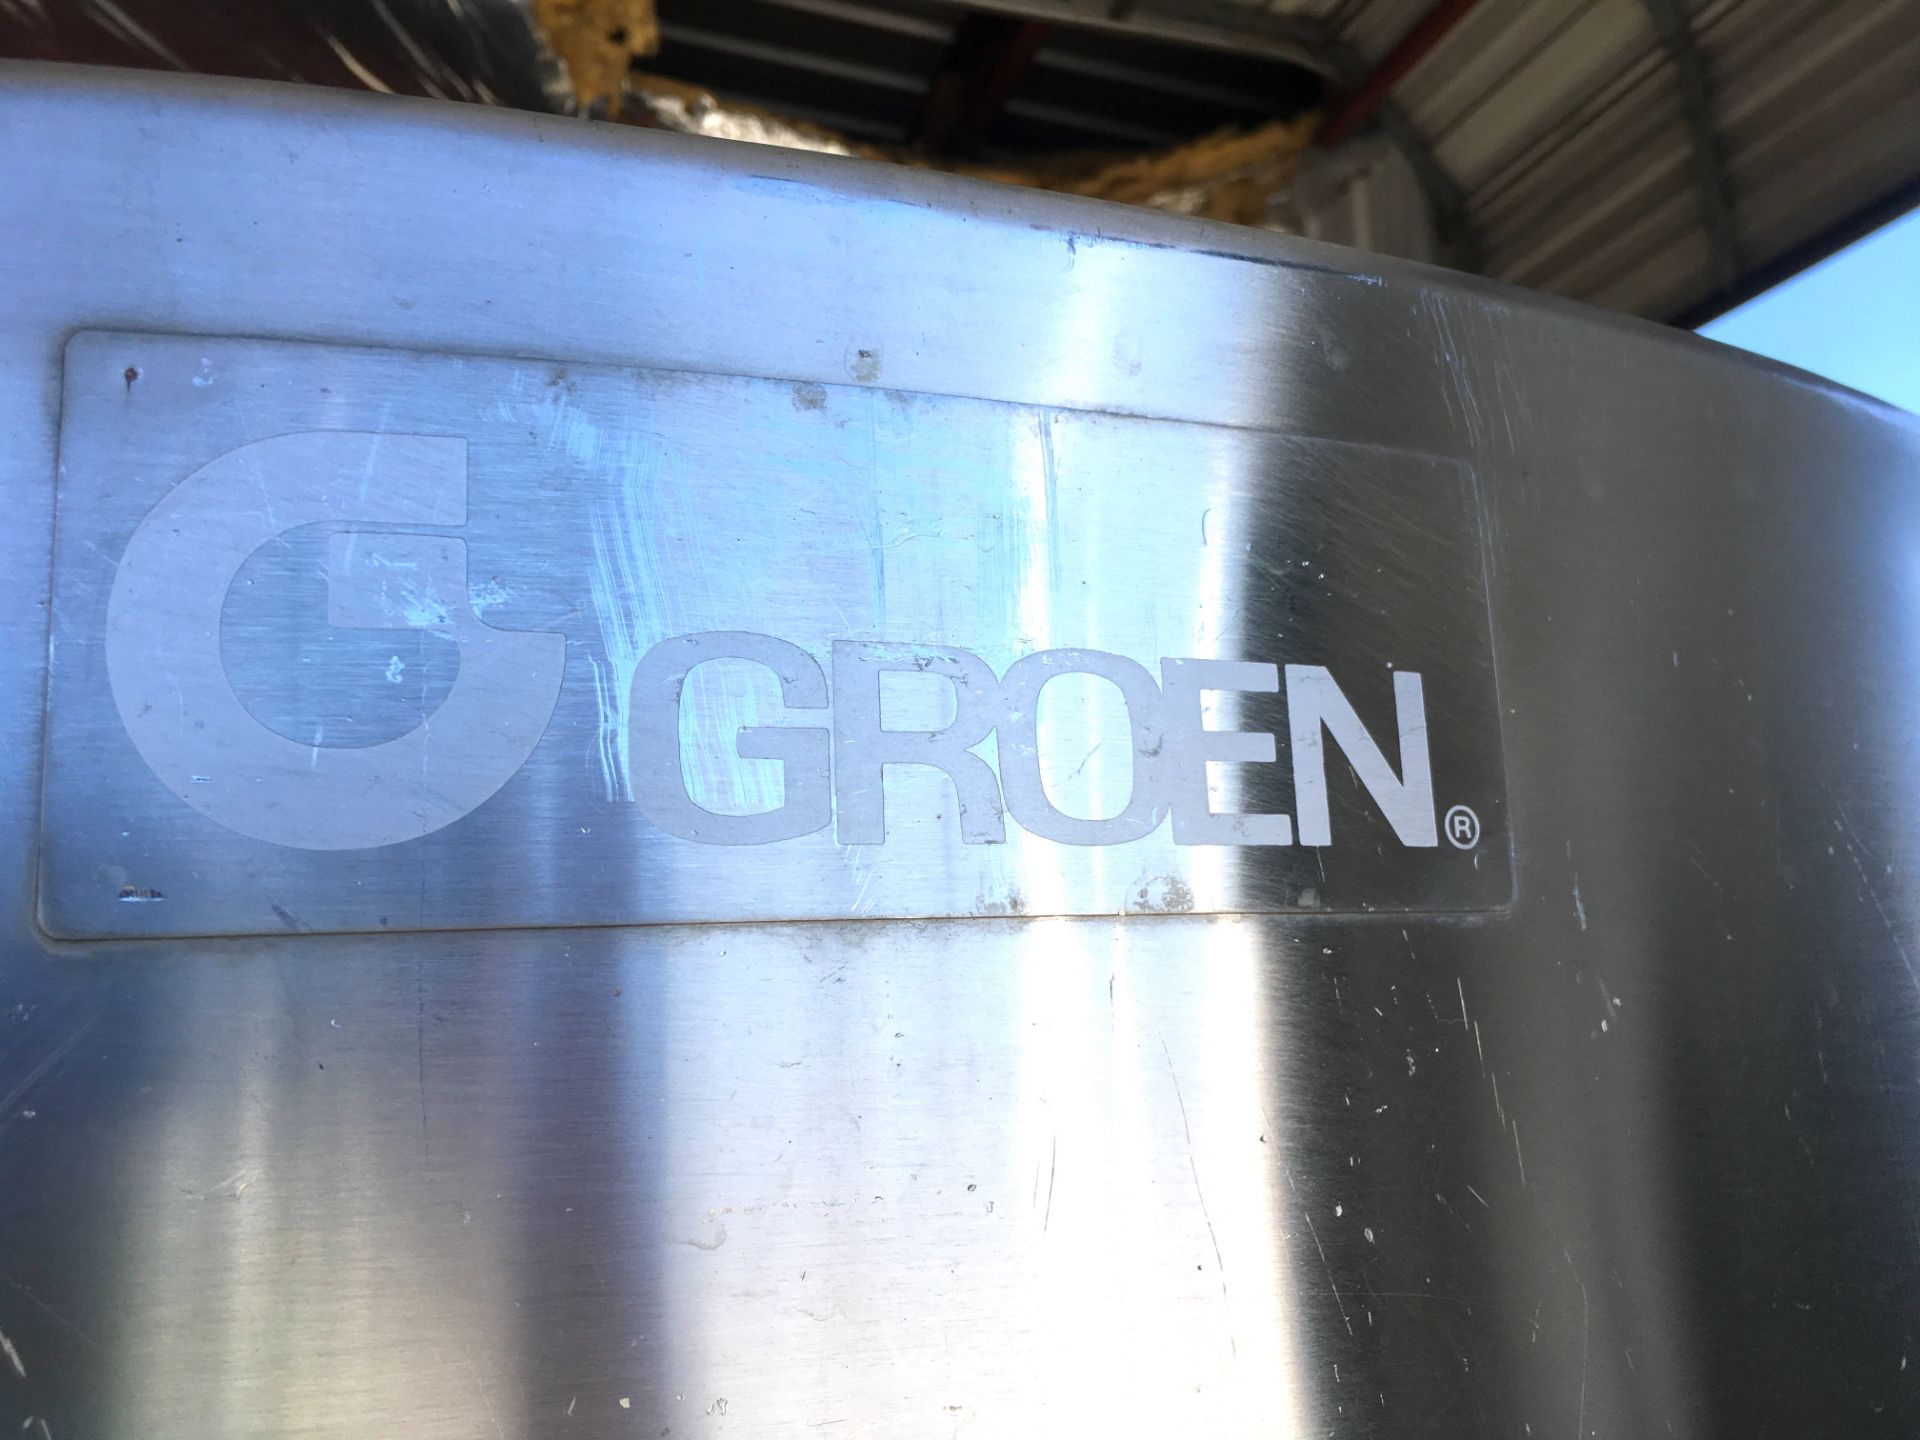 Groen 500 Gallon Jacketed Serial: 03077-1, Last used in Food Processing Plant, Stainless Steel - Image 6 of 10